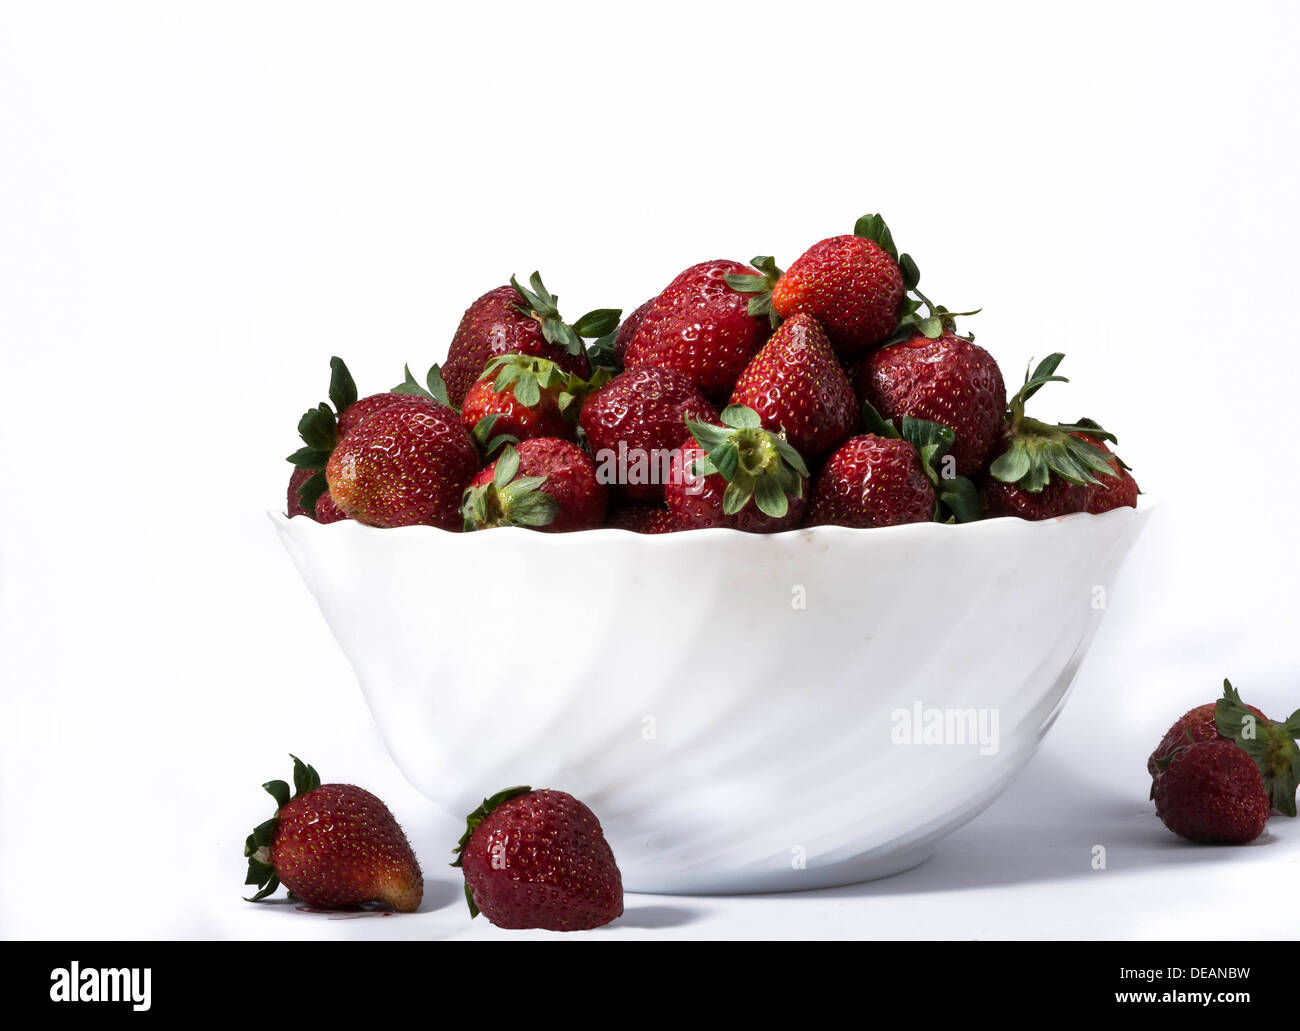 Bowl of red strawberries. Isolated image Stock Photo